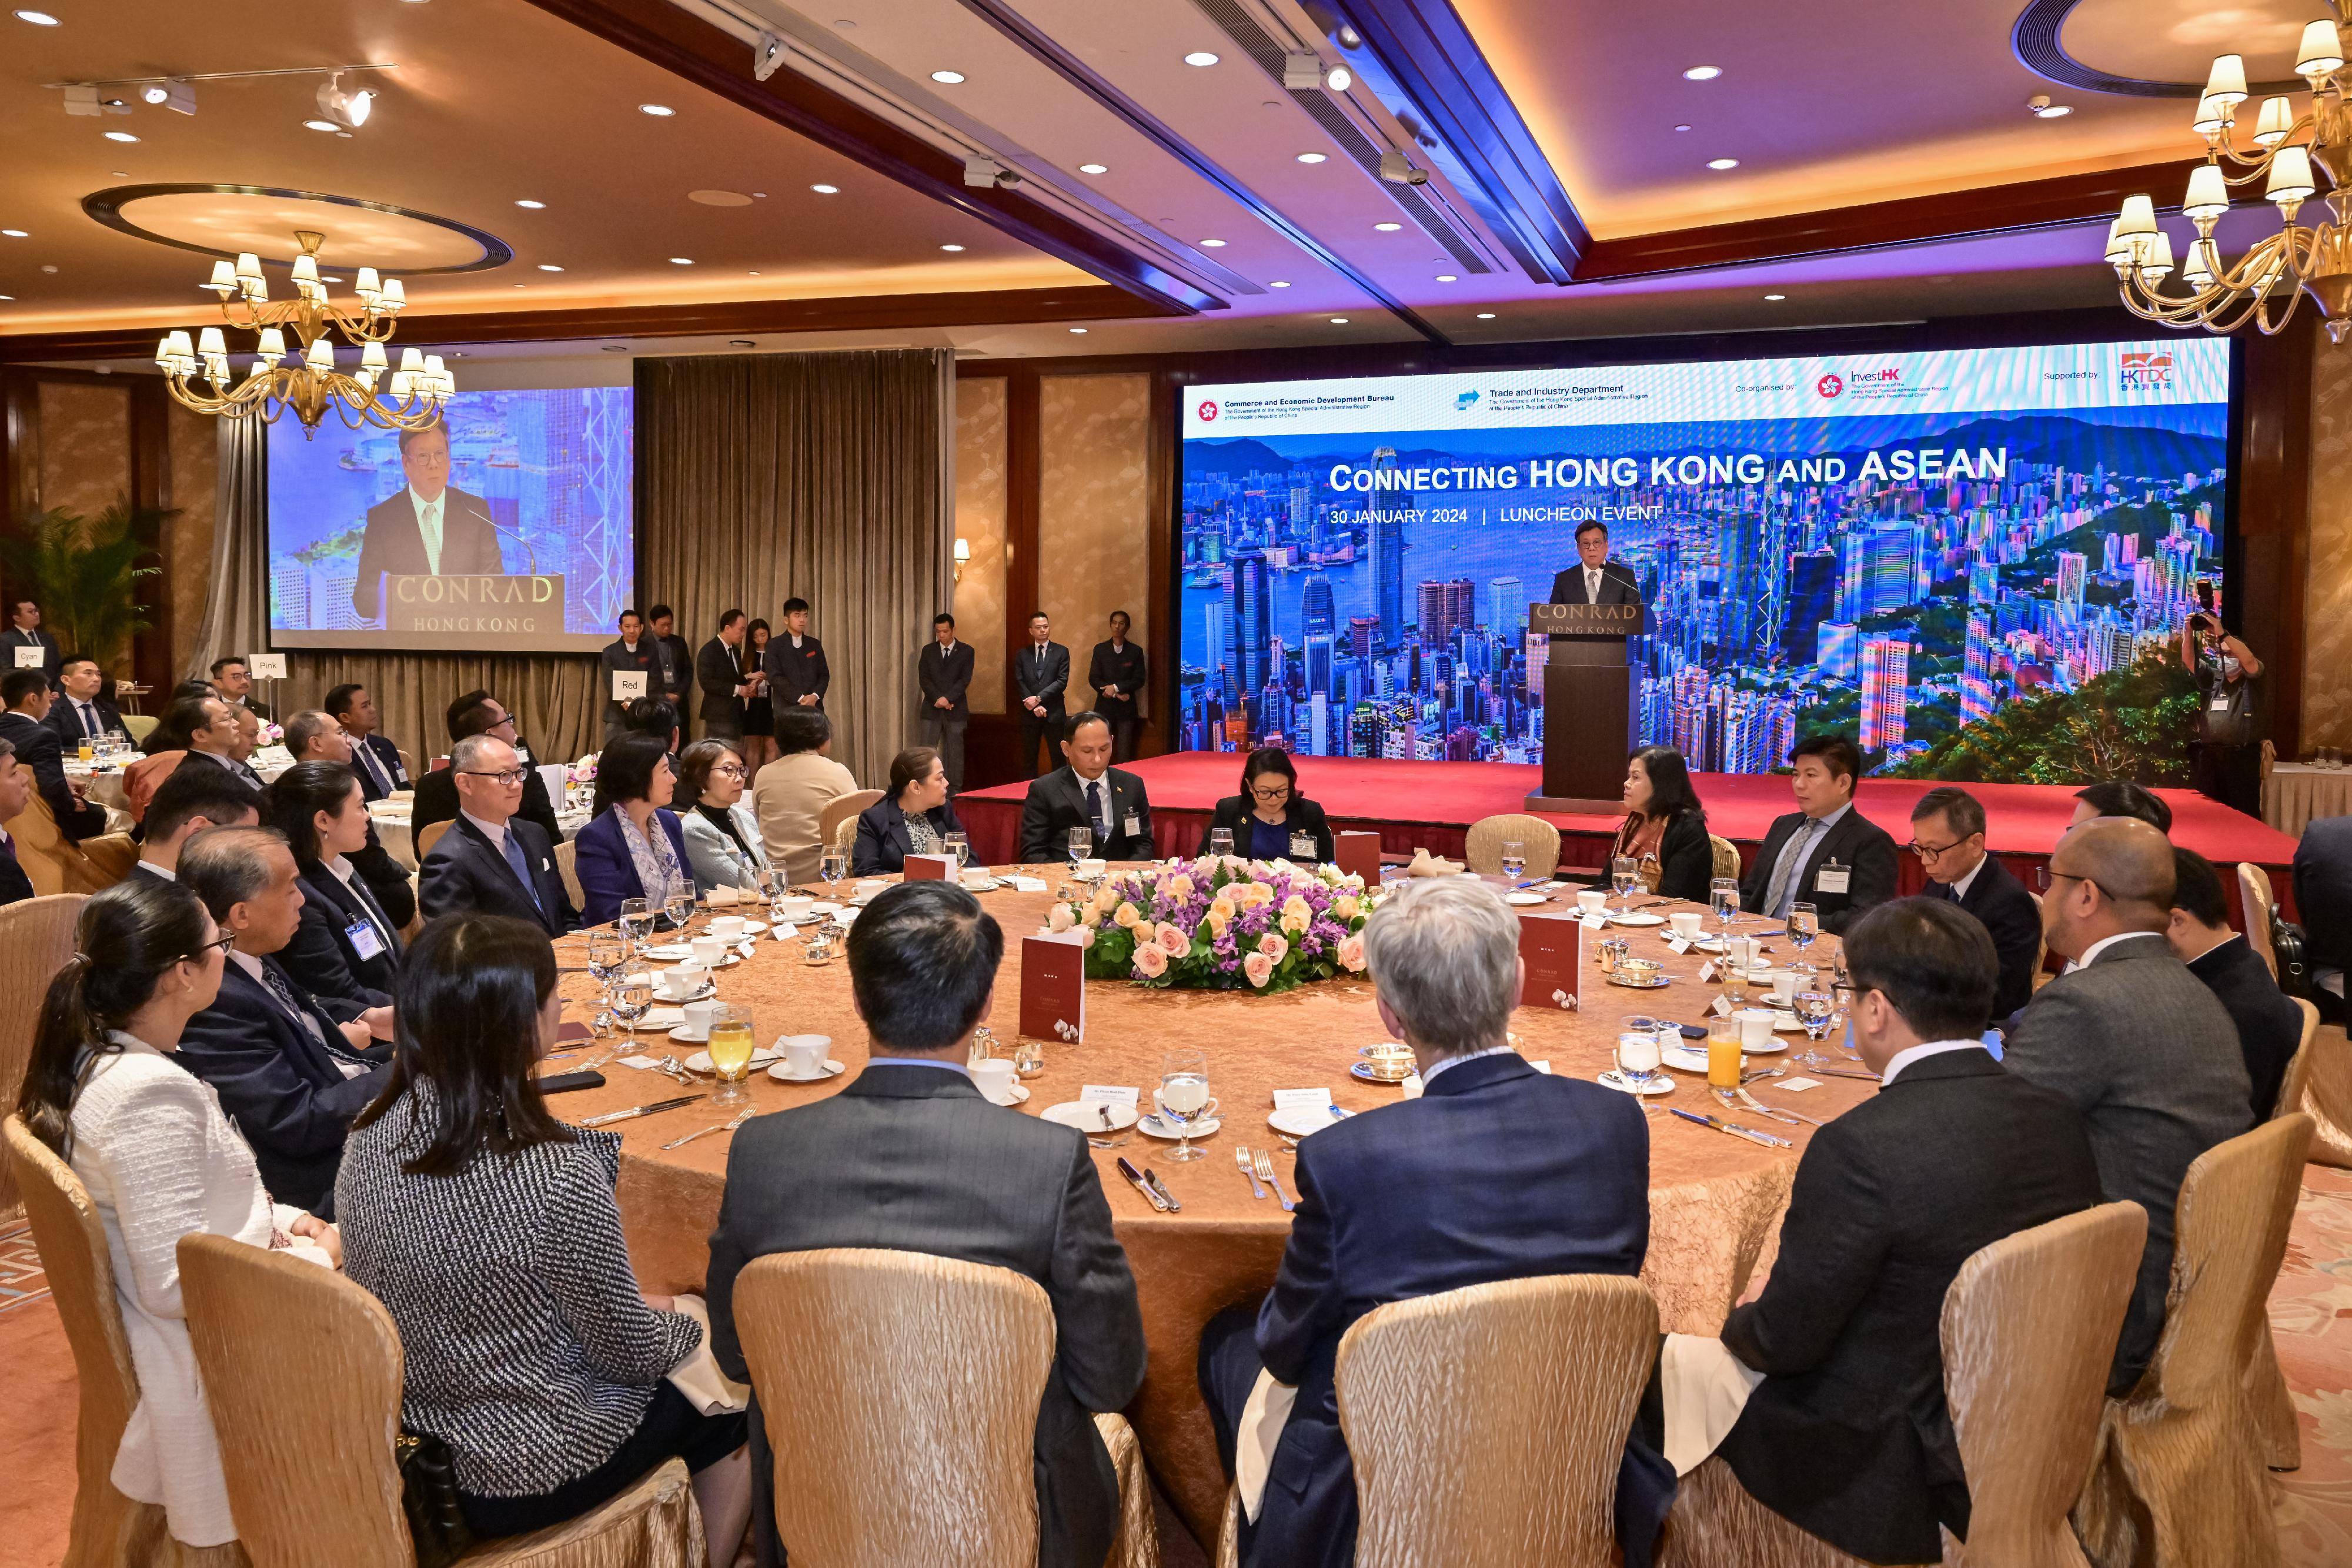 The Secretary for Commerce and Economic Development, Mr Algernon Yau, today (January 30) attended the "Connecting Hong Kong and ASEAN" Luncheon co-organised by the Trade and Industry Department and Invest Hong Kong for some 120 representatives of consulates, local and foreign chambers of commerce, professional bodies and the business community to update them on the Government's work on strengthening connection with the Association of Southeast Asian Nations.